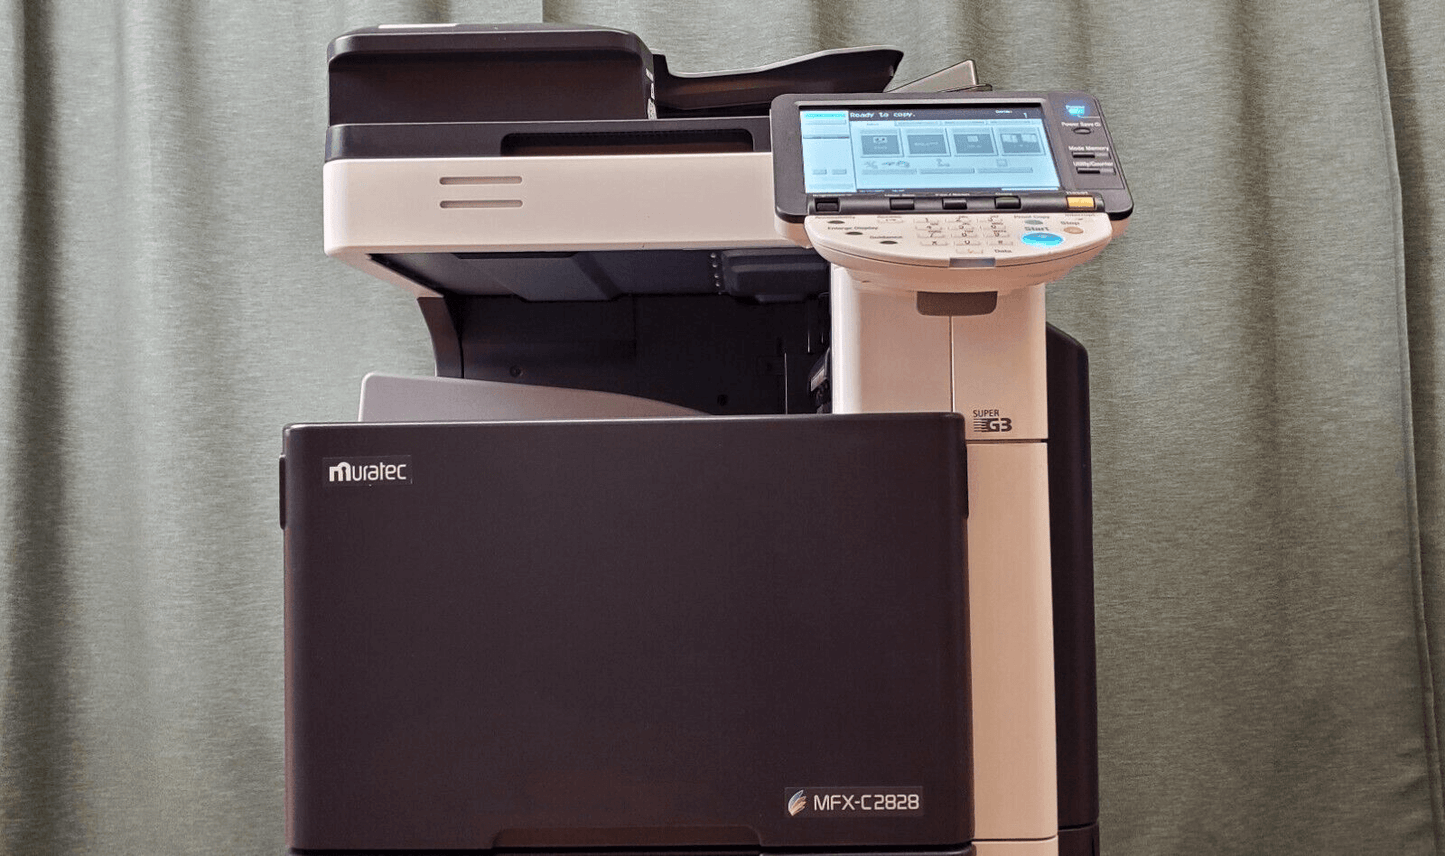 Muratec MFX-c2828 Color Copier Printer Scanner and Fax VERY LOW Meter Count 77k! - copier-clearance-center